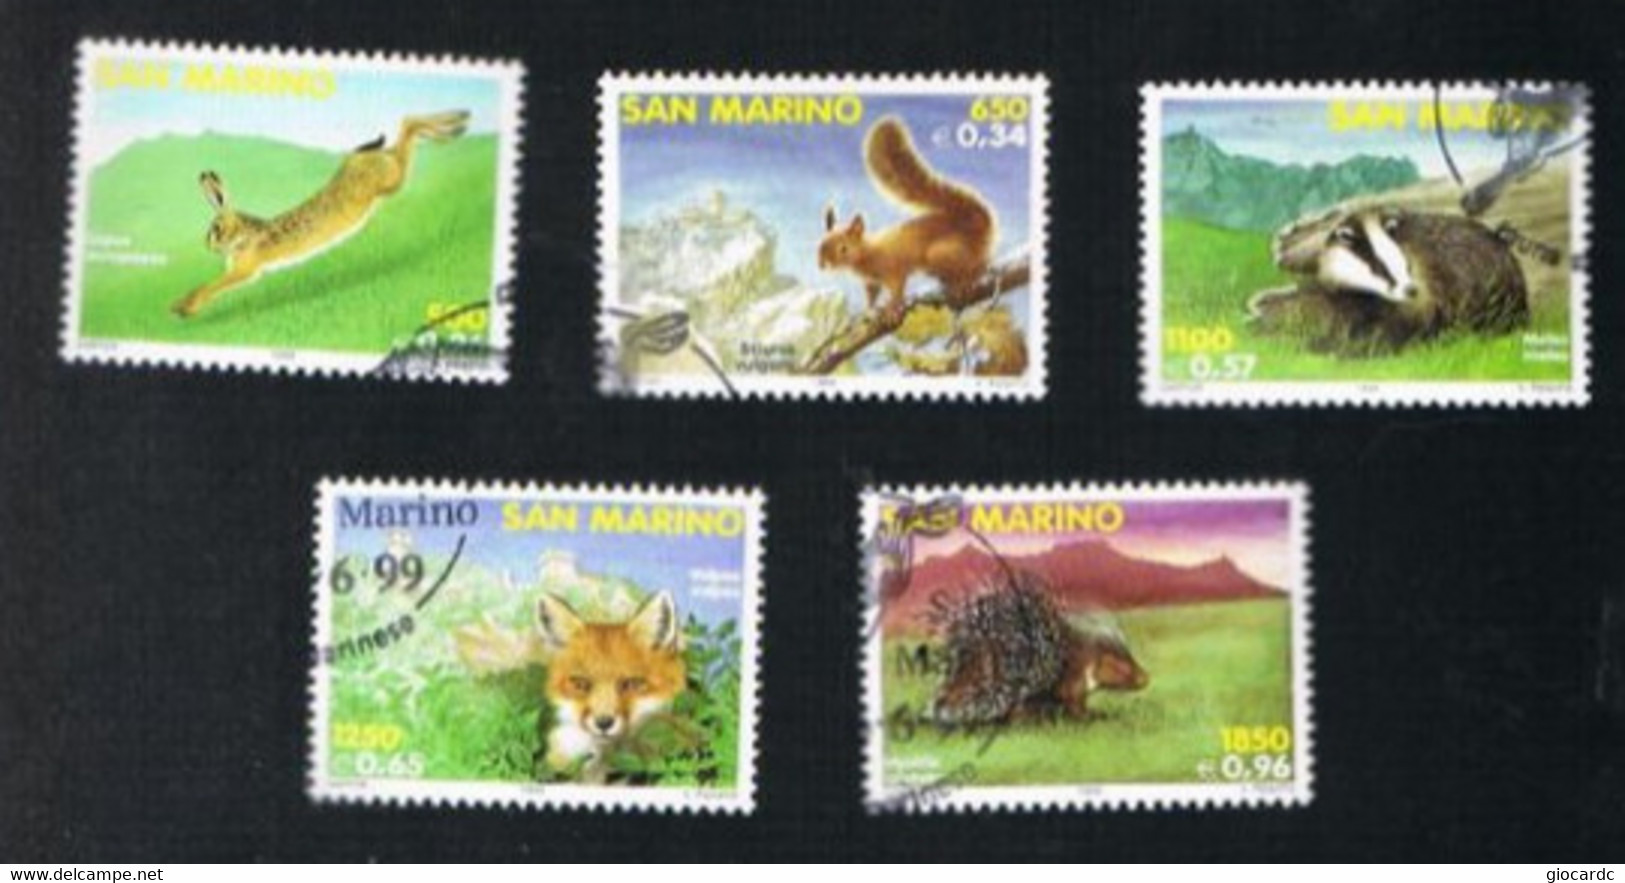 SAN MARINO - UN 1683.1687 - 1999 FAUNA LOCALE   (COMPLET SET OF 5)  - USED° - Gebraucht